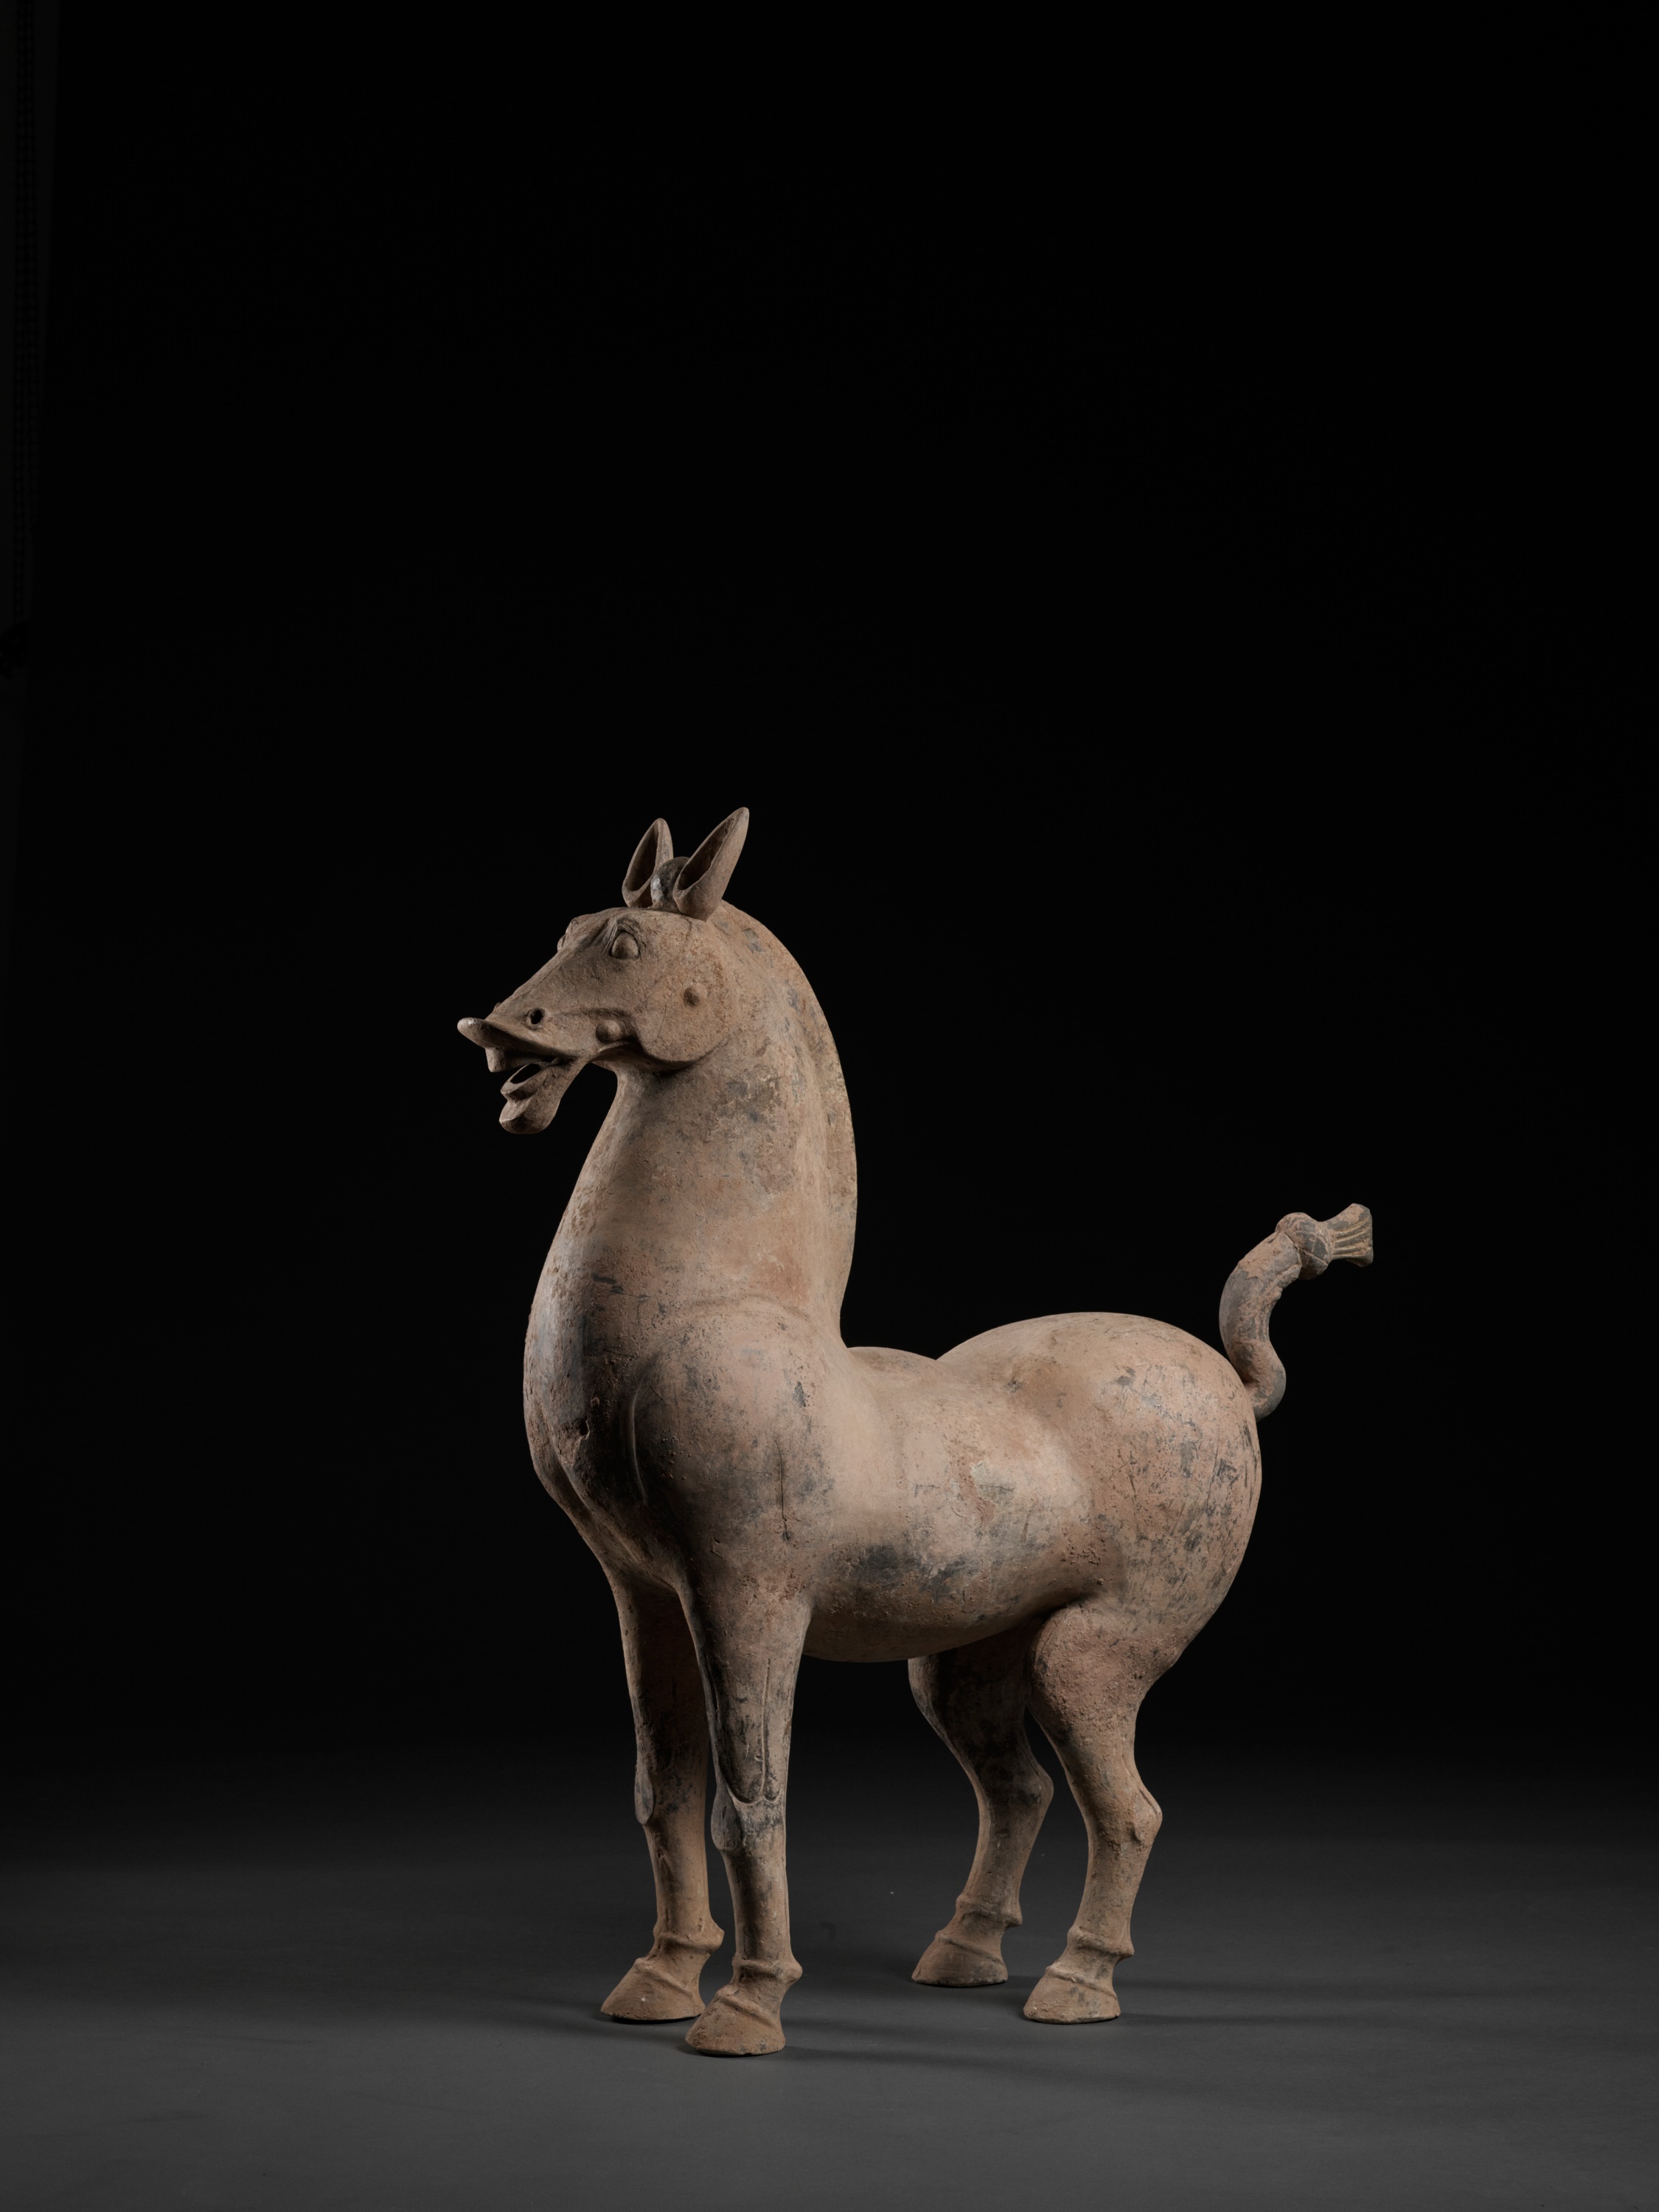 A MONUMENTAL SICHUAN POTTERY FIGURE OF A HORSE, HAN DYNASTY - Image 8 of 11